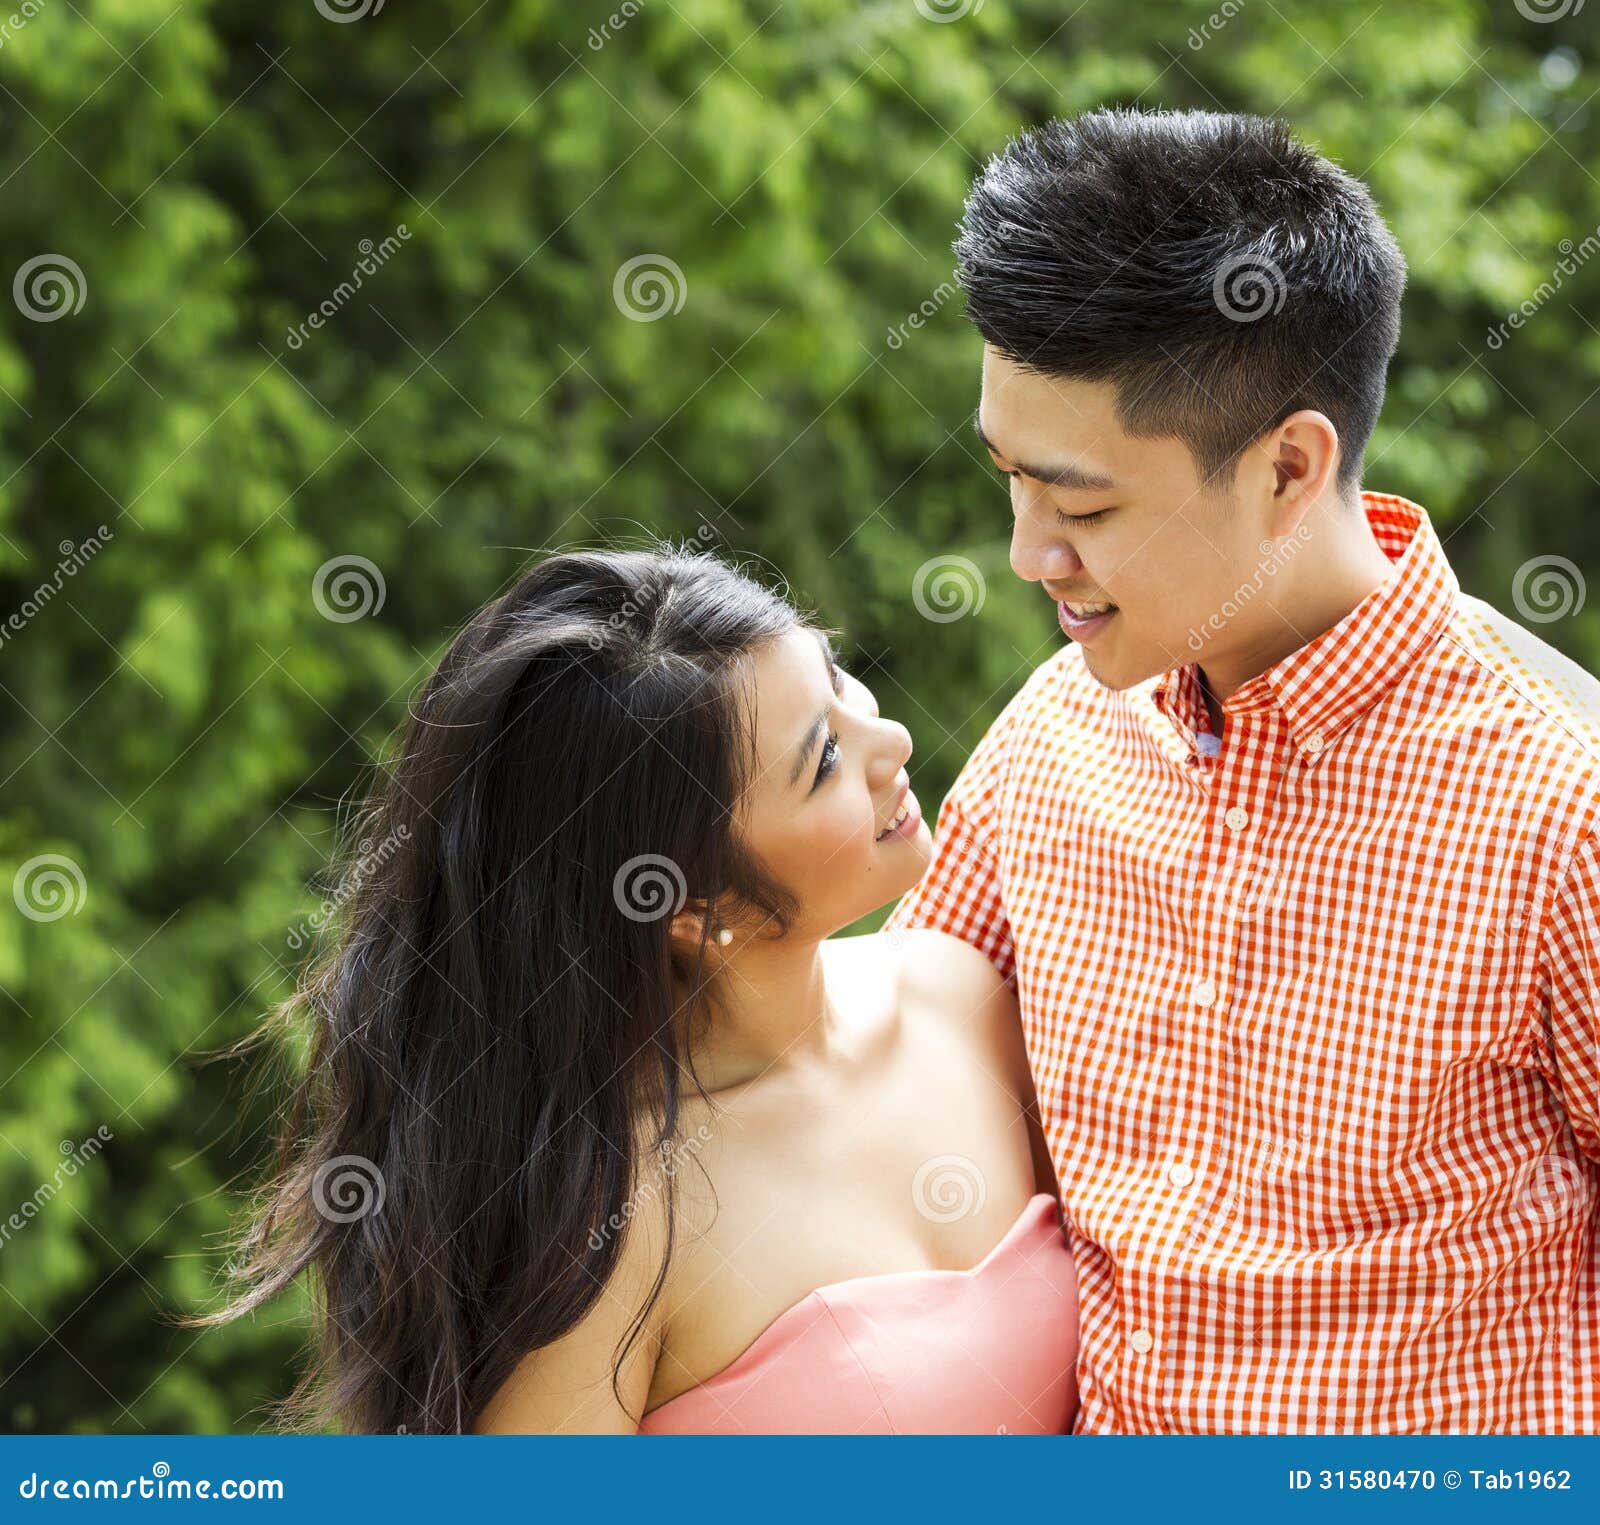 Young Adult Couple Sharing a Romantic Moment Outside Stock Photo